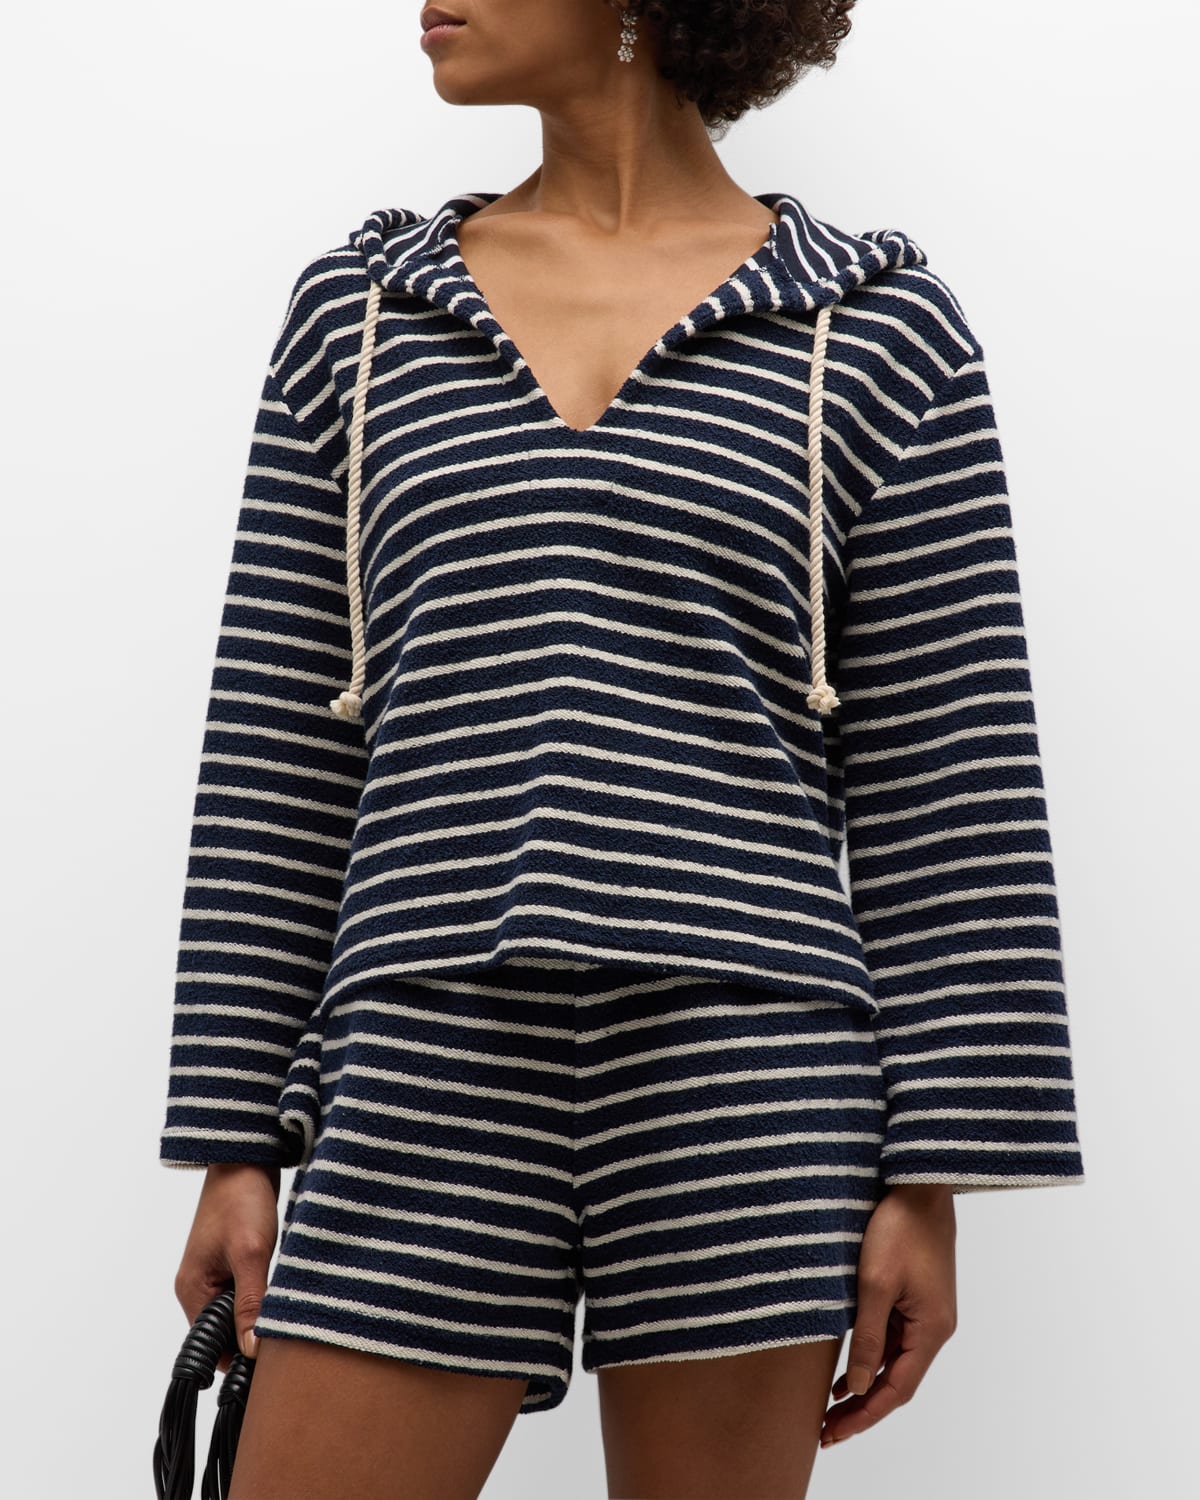 Honorine Jacques Striped Hoodie In Natural Navy